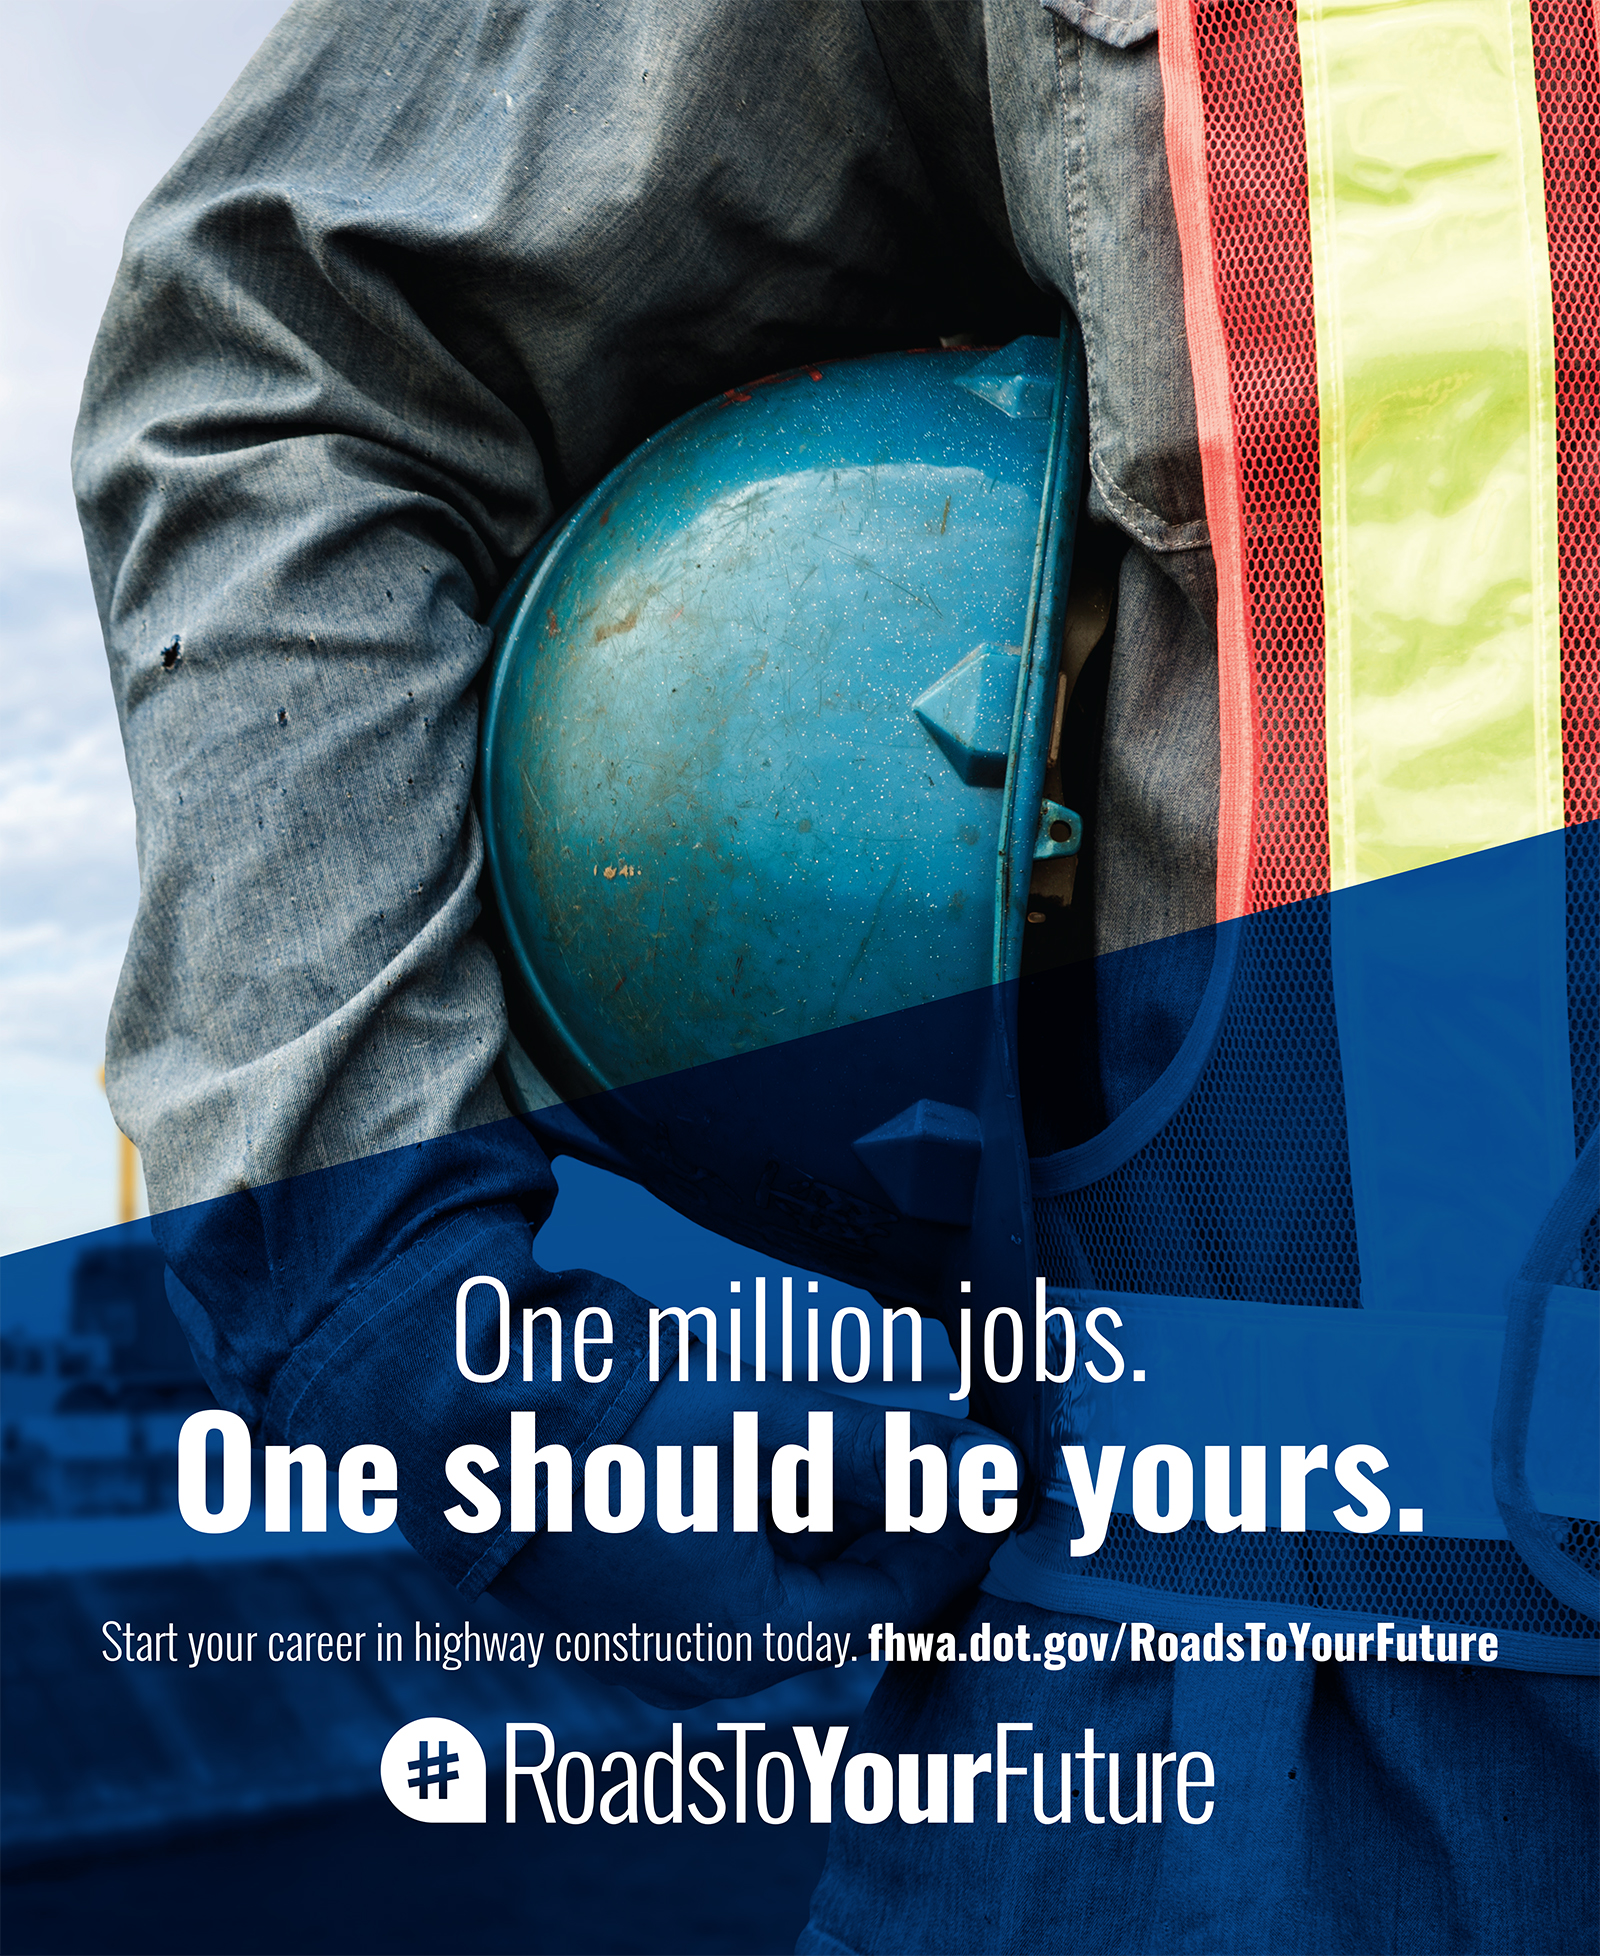 Roads to your future job promotion poster.